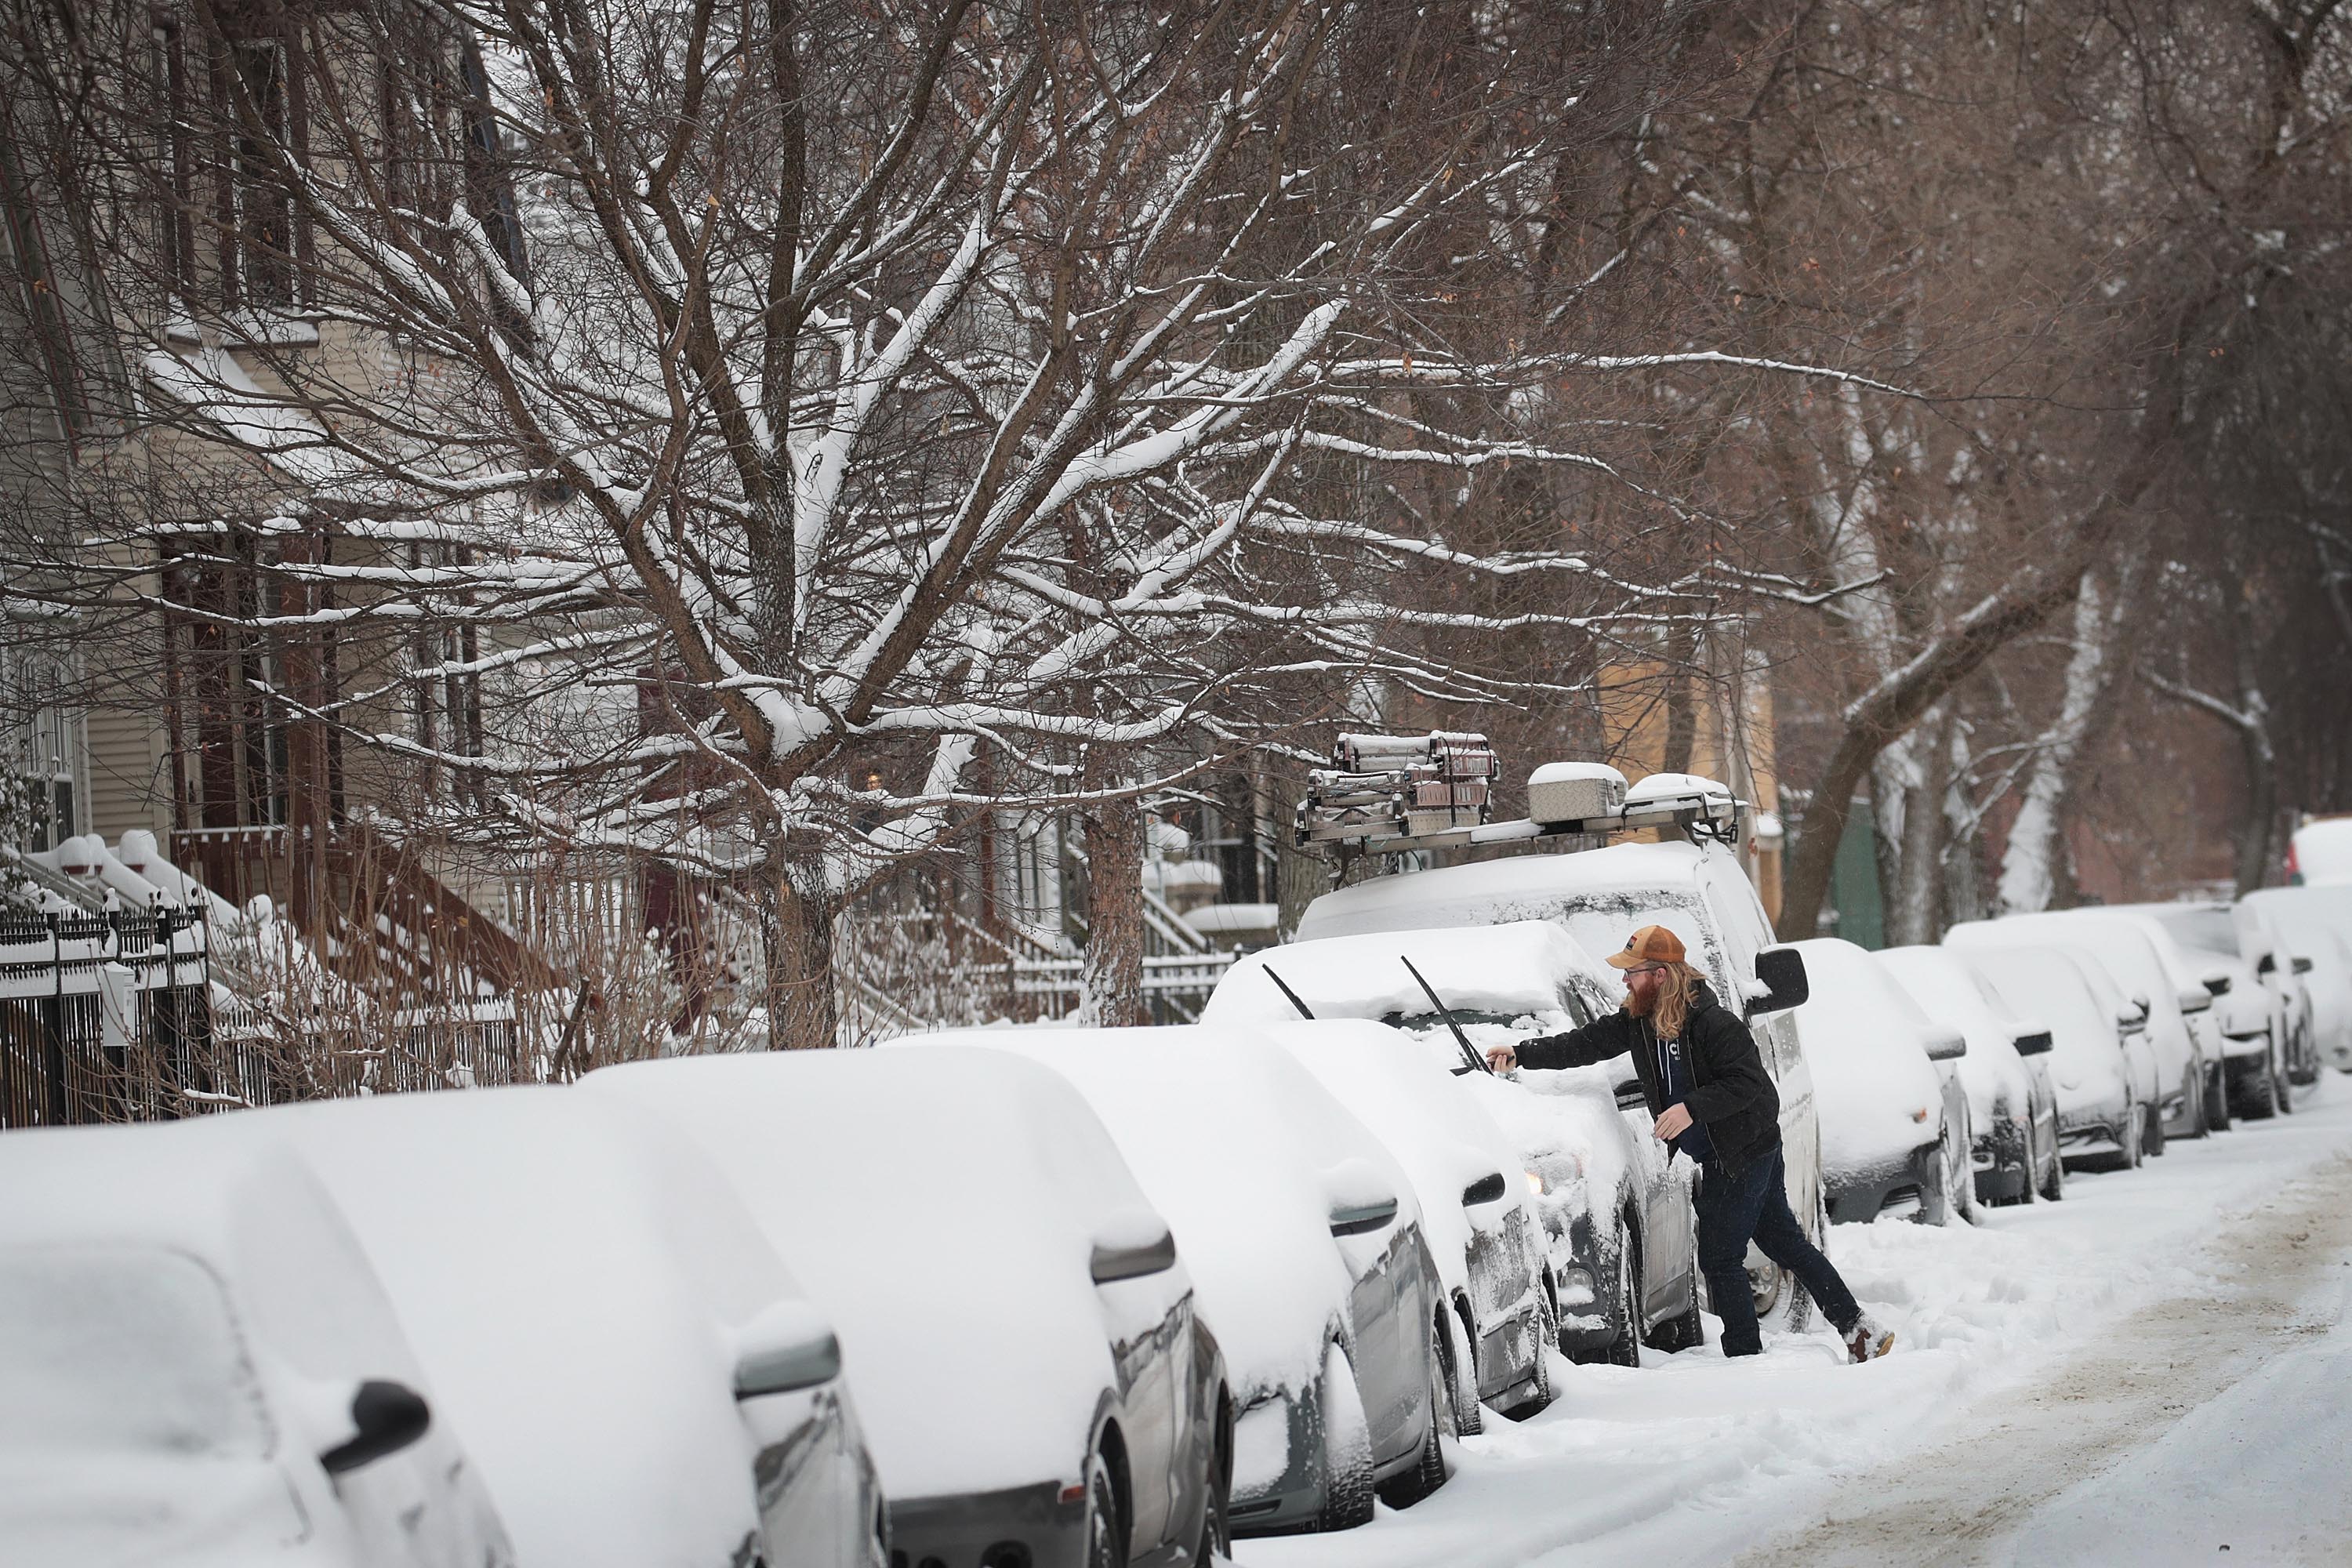 Residents clear up following a snowstorm in the area on January 19, 2019 in Chicago, Illinois | Photo: Getty Images